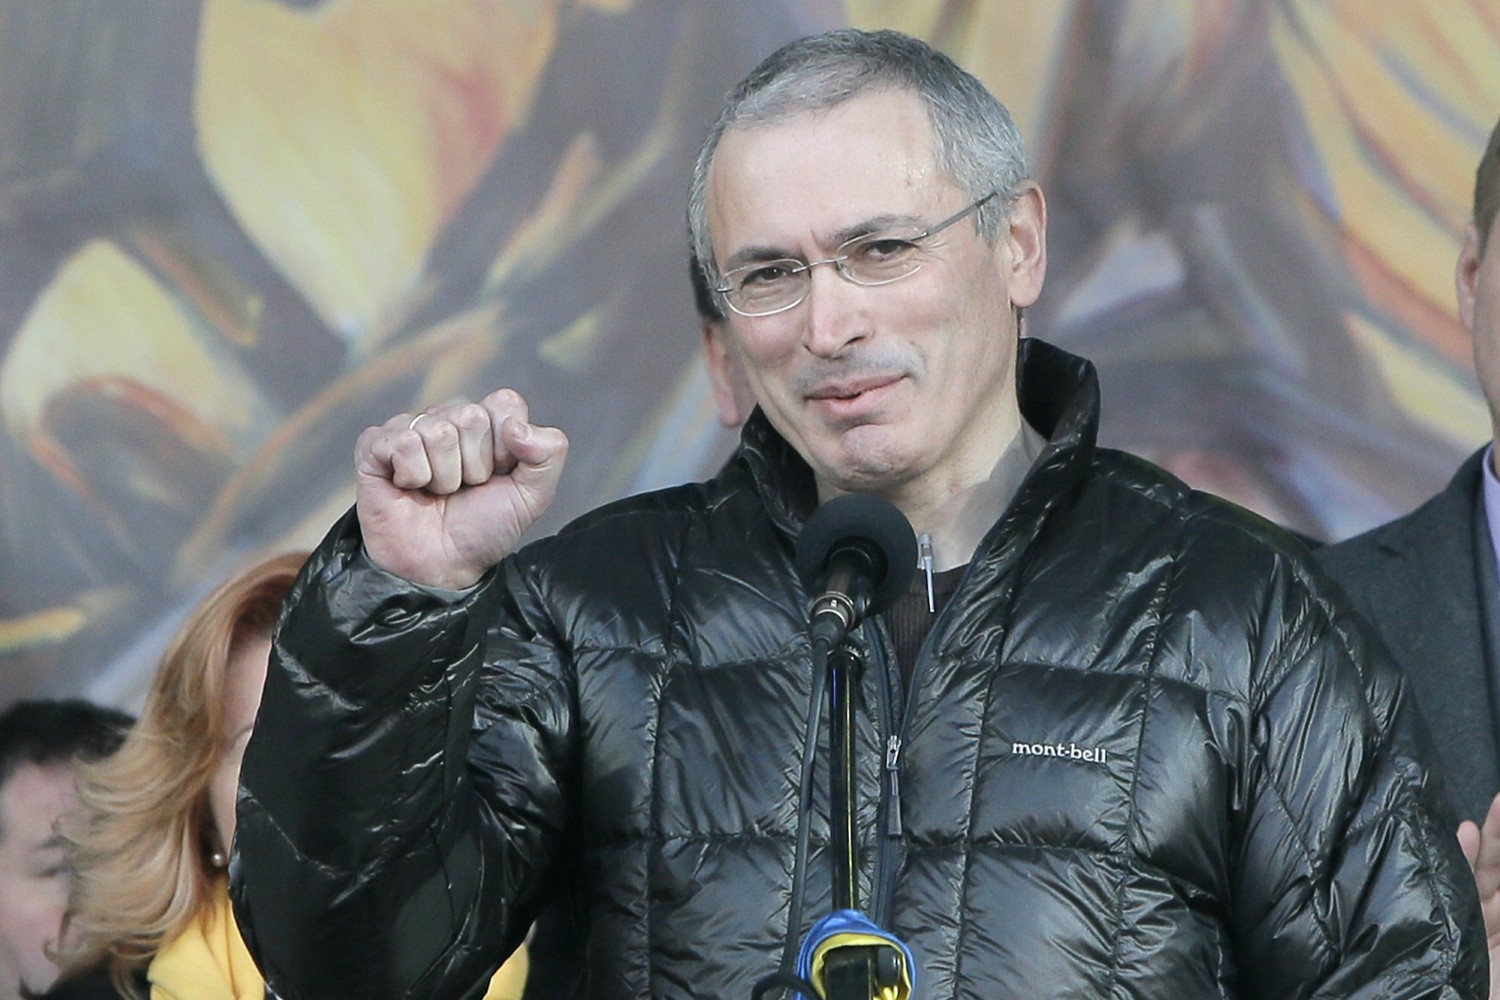 FILE - In this March 9, 2014 file photo, Russian former oil tycoon Mikhail Khodorkovsky cheers people during a rally in Independence Square in Kiev, Ukraine. A Dublin judge ordered authorities on Wednesday, Dec. 7, 2016, to unfreeze 100 million euros ($107 million) in cash belonging to Khodorkovsky, ruling that police had provided no evidence that the funds were illegally gained as Russia contends. (AP Photo/Efrem Lukatsky, File)